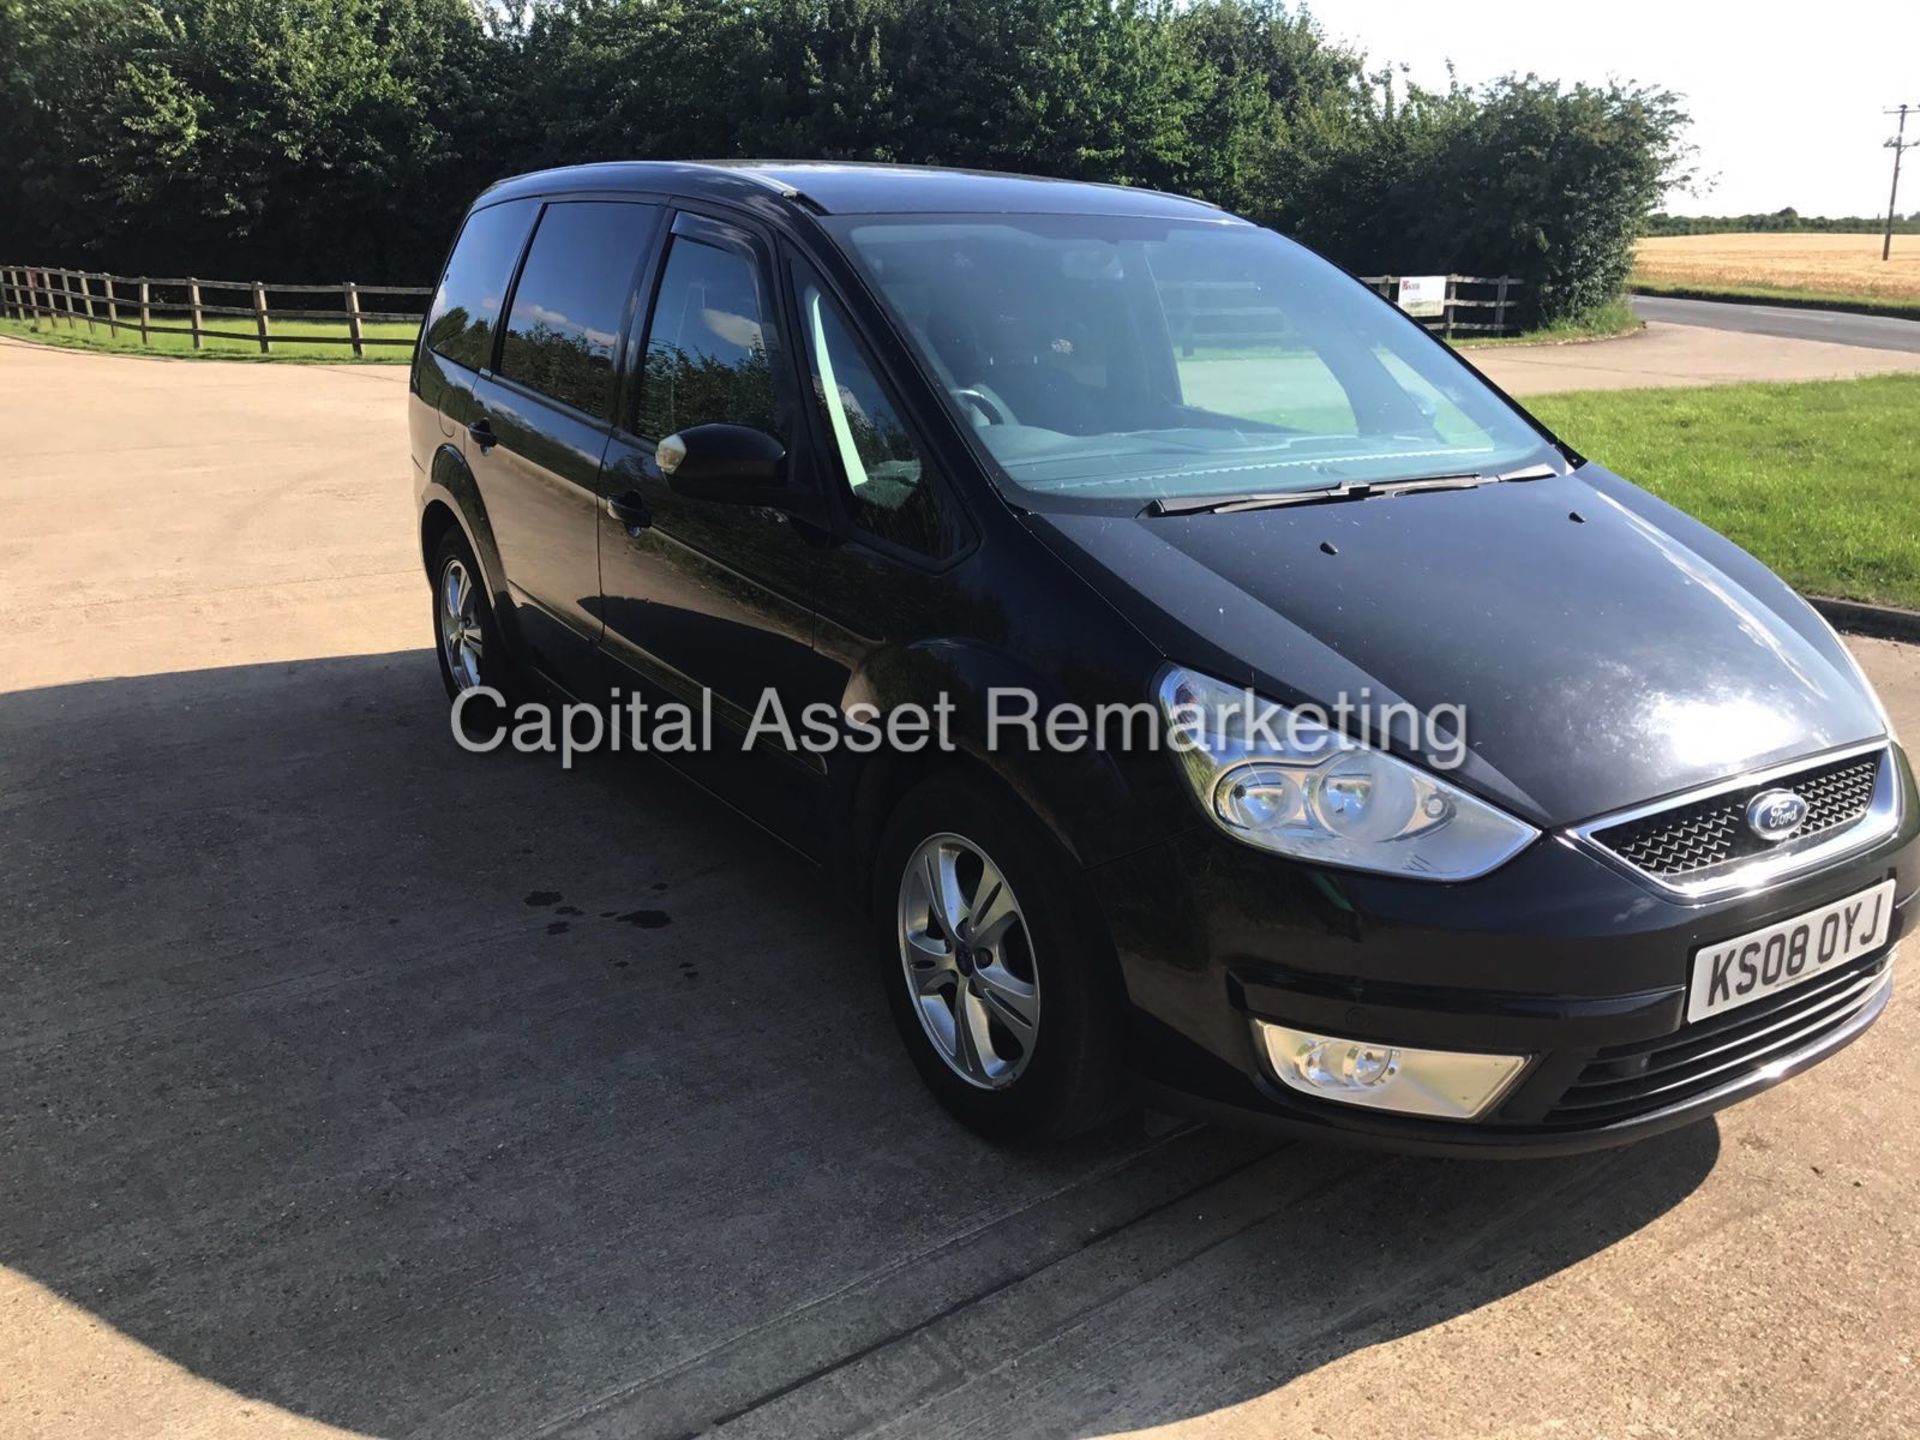 (ON SALE) FORD GALAXY 1.8TDCI ZETEC "125BHP-6 SPEED" 7 SEATER MPV -MASSIVE SPEC -CLIMATE -AIR CON - Image 3 of 14